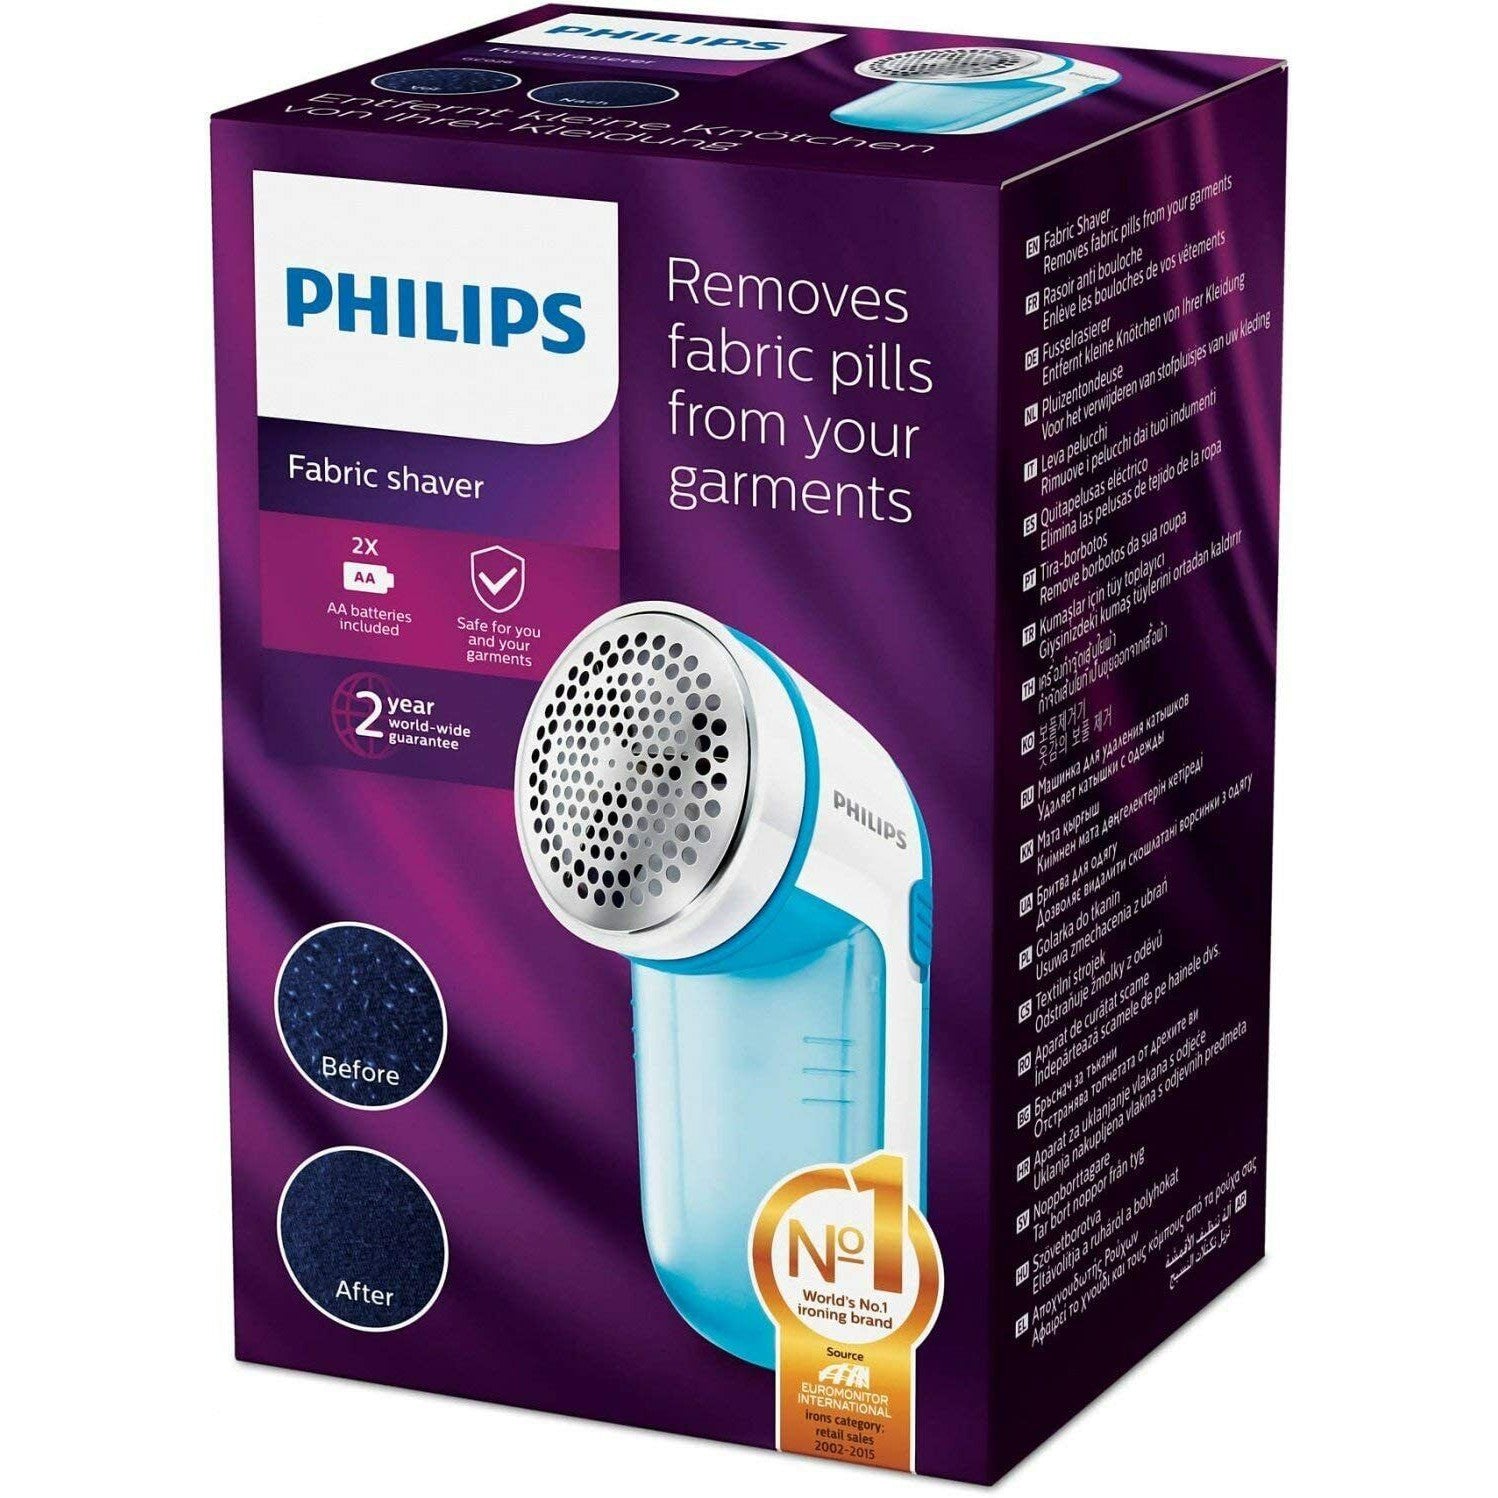 Philips Fabric Shaver GC026/00 - Revive your old garments instantly